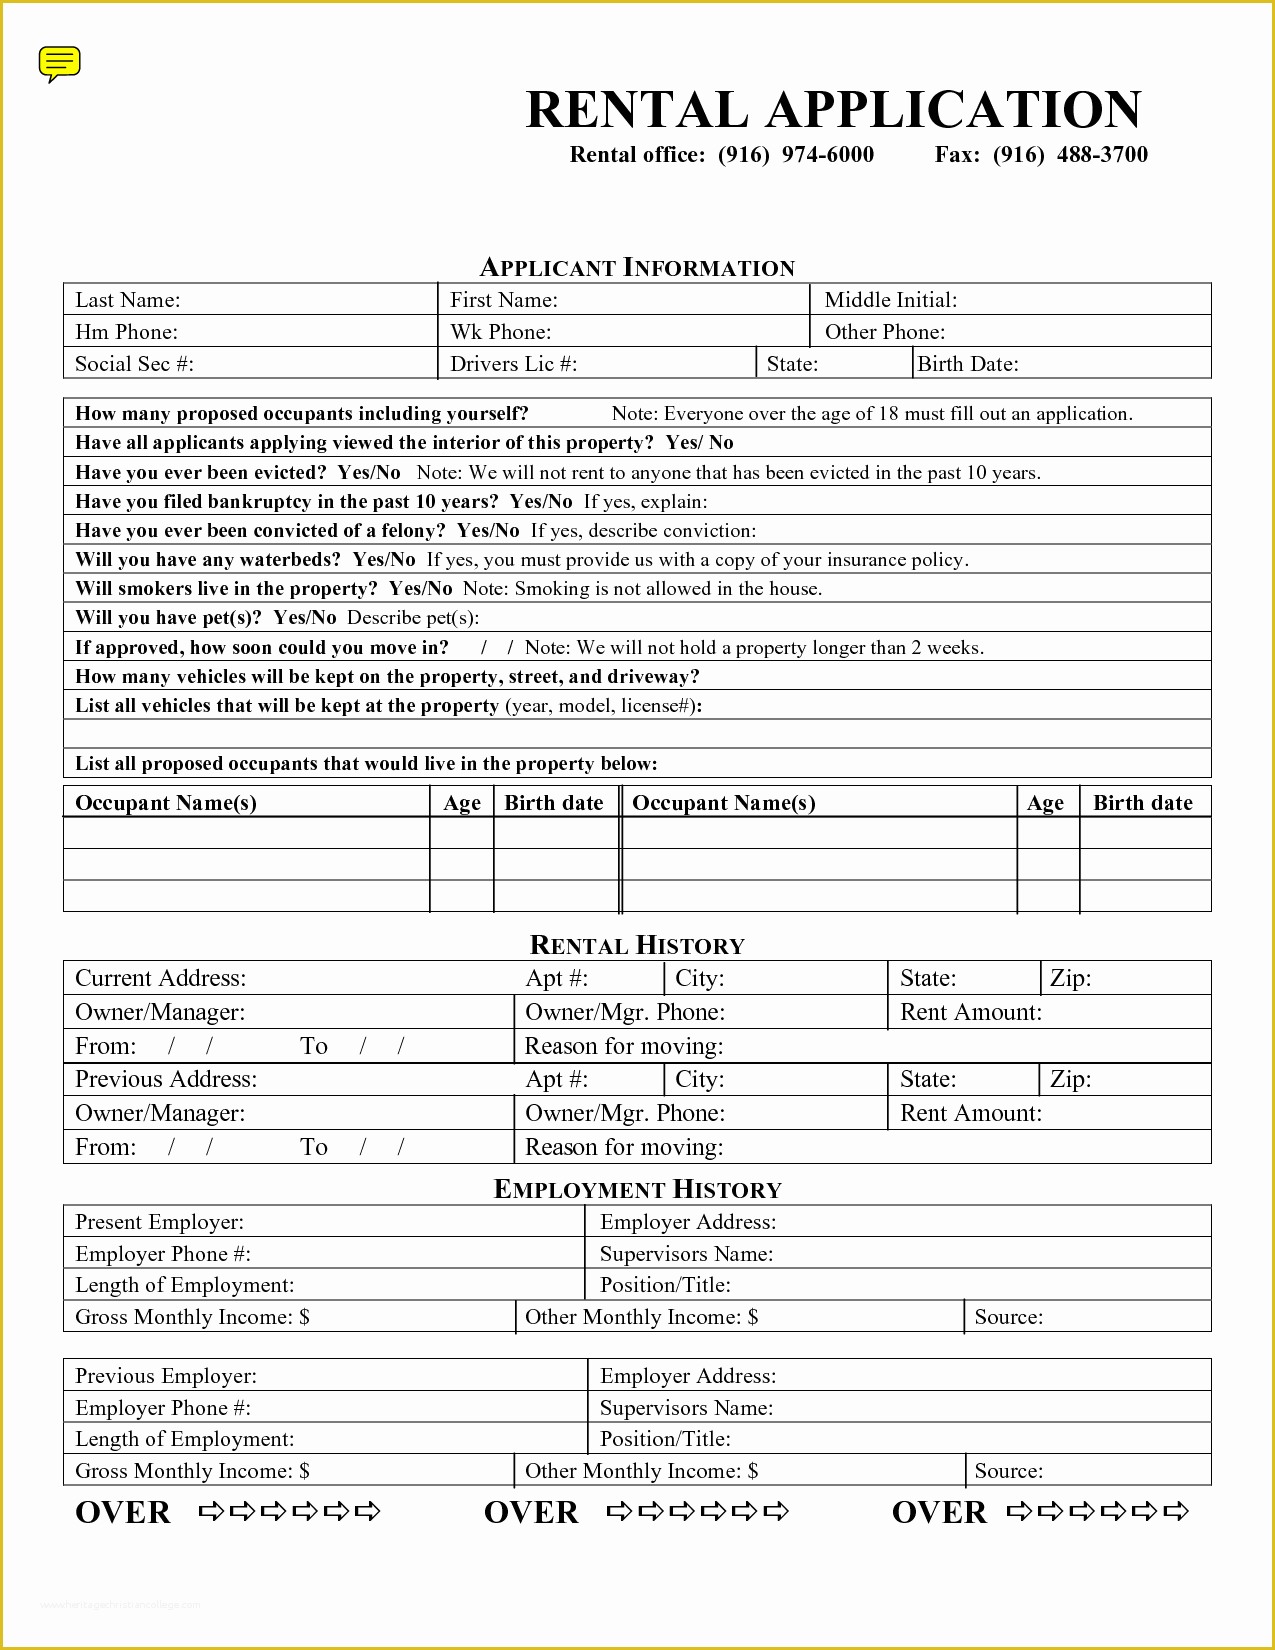 Free Rental Application form Template Of Free Rental Application form by Mary Jmenintigar House